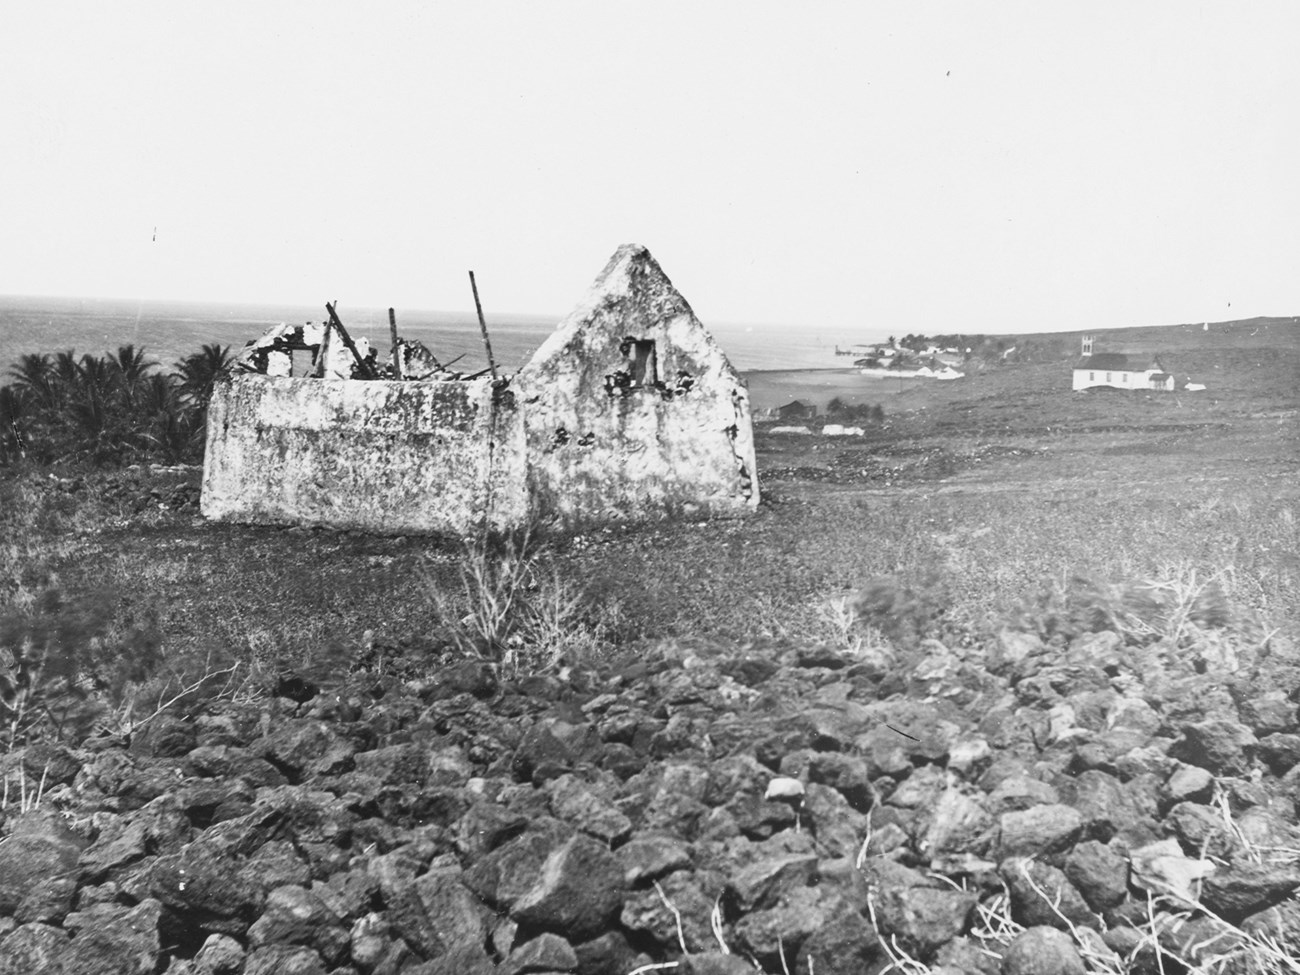 Black and white photograph of deteriorating hut surrounded by rocks